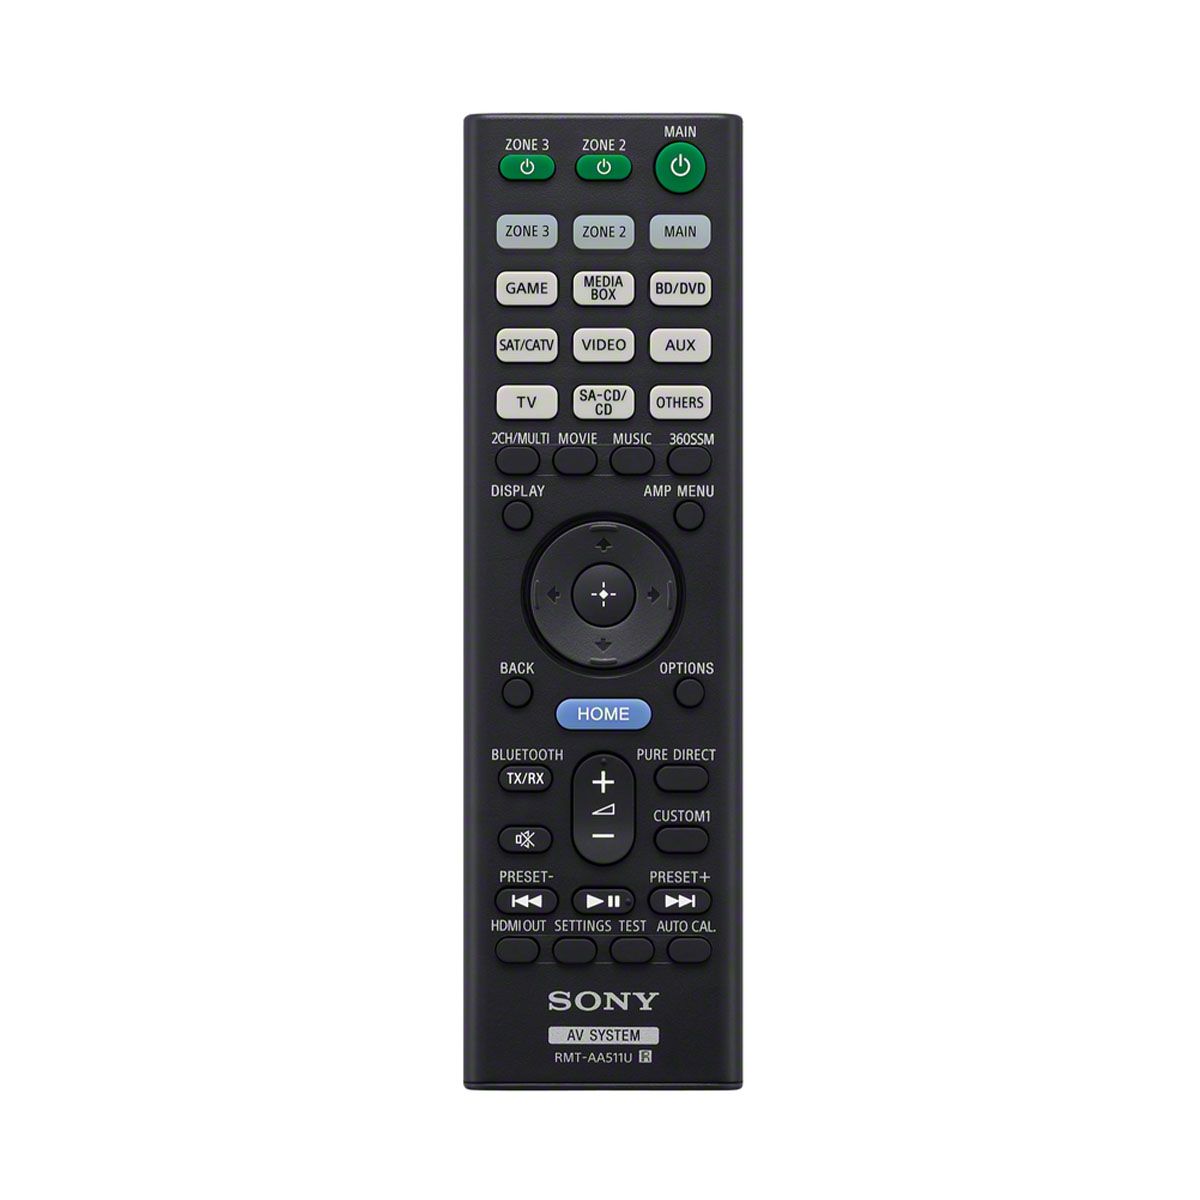 Sony STR-AN1000 Home Theater Receiver - remote